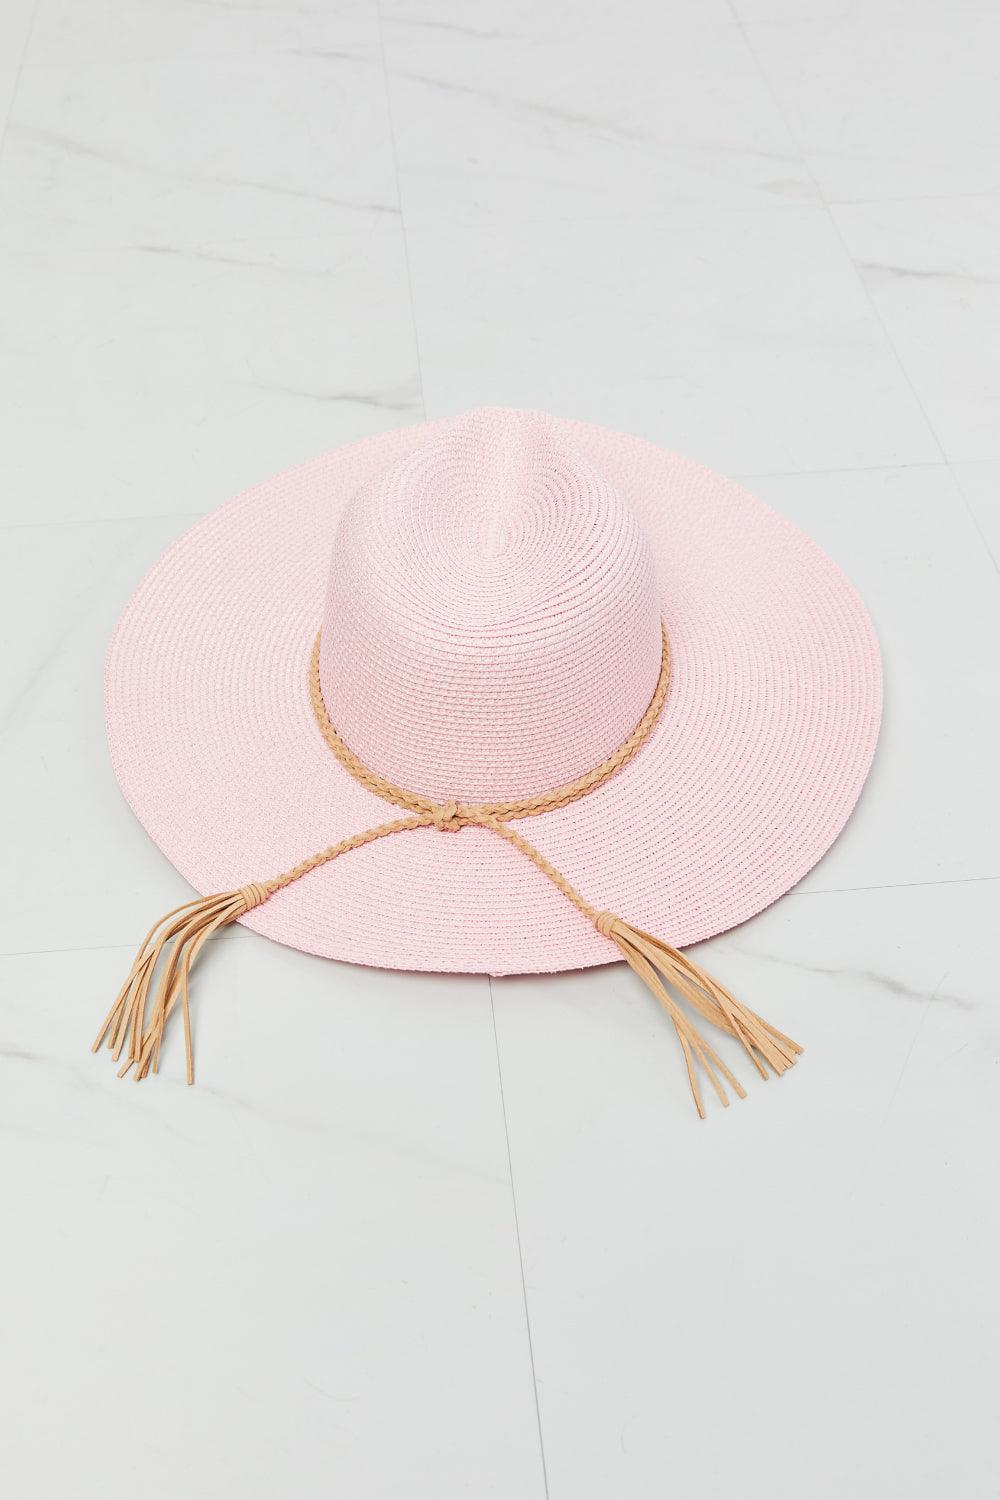 Fame Route To Paradise Straw Hat - Lab Fashion, Home & Health